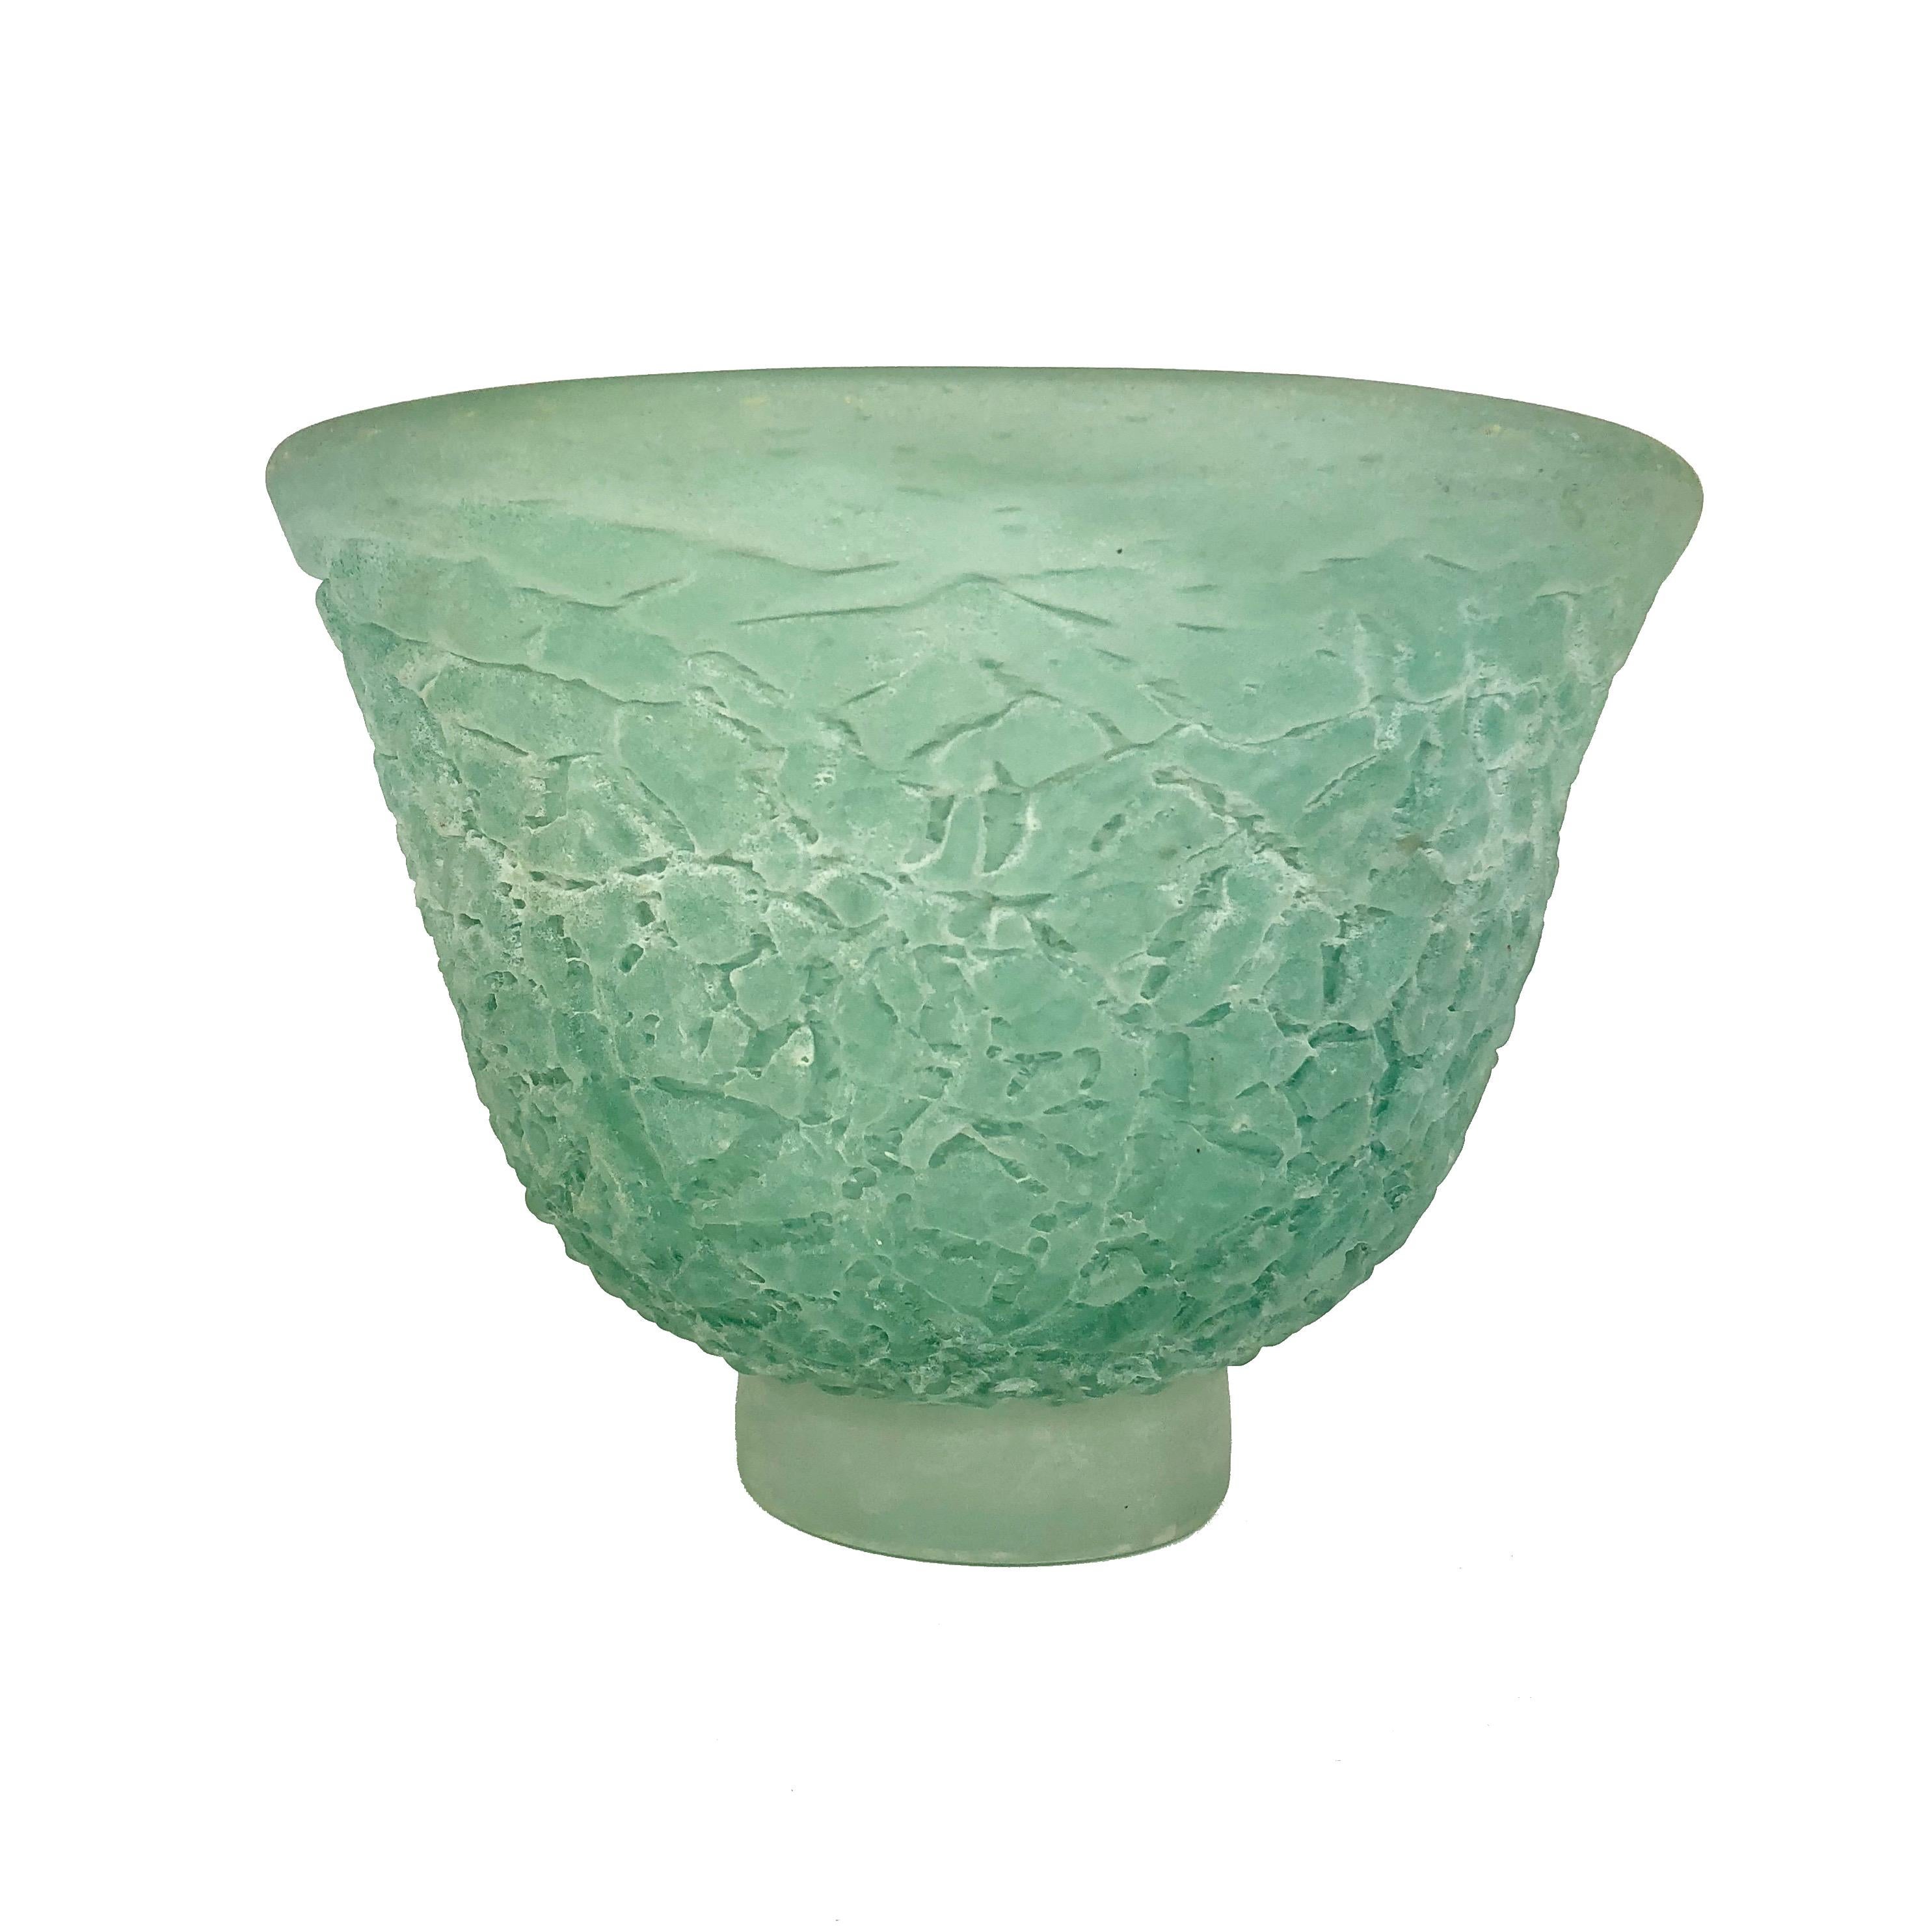 This absolutely gorgeous and monumental signed Italian Murano Cenedese sculptural handblown glass centre piece bowl is of the scavo technique. It is from the 1980s. The luscious color of the light turquoise mixed in with patches of light black or